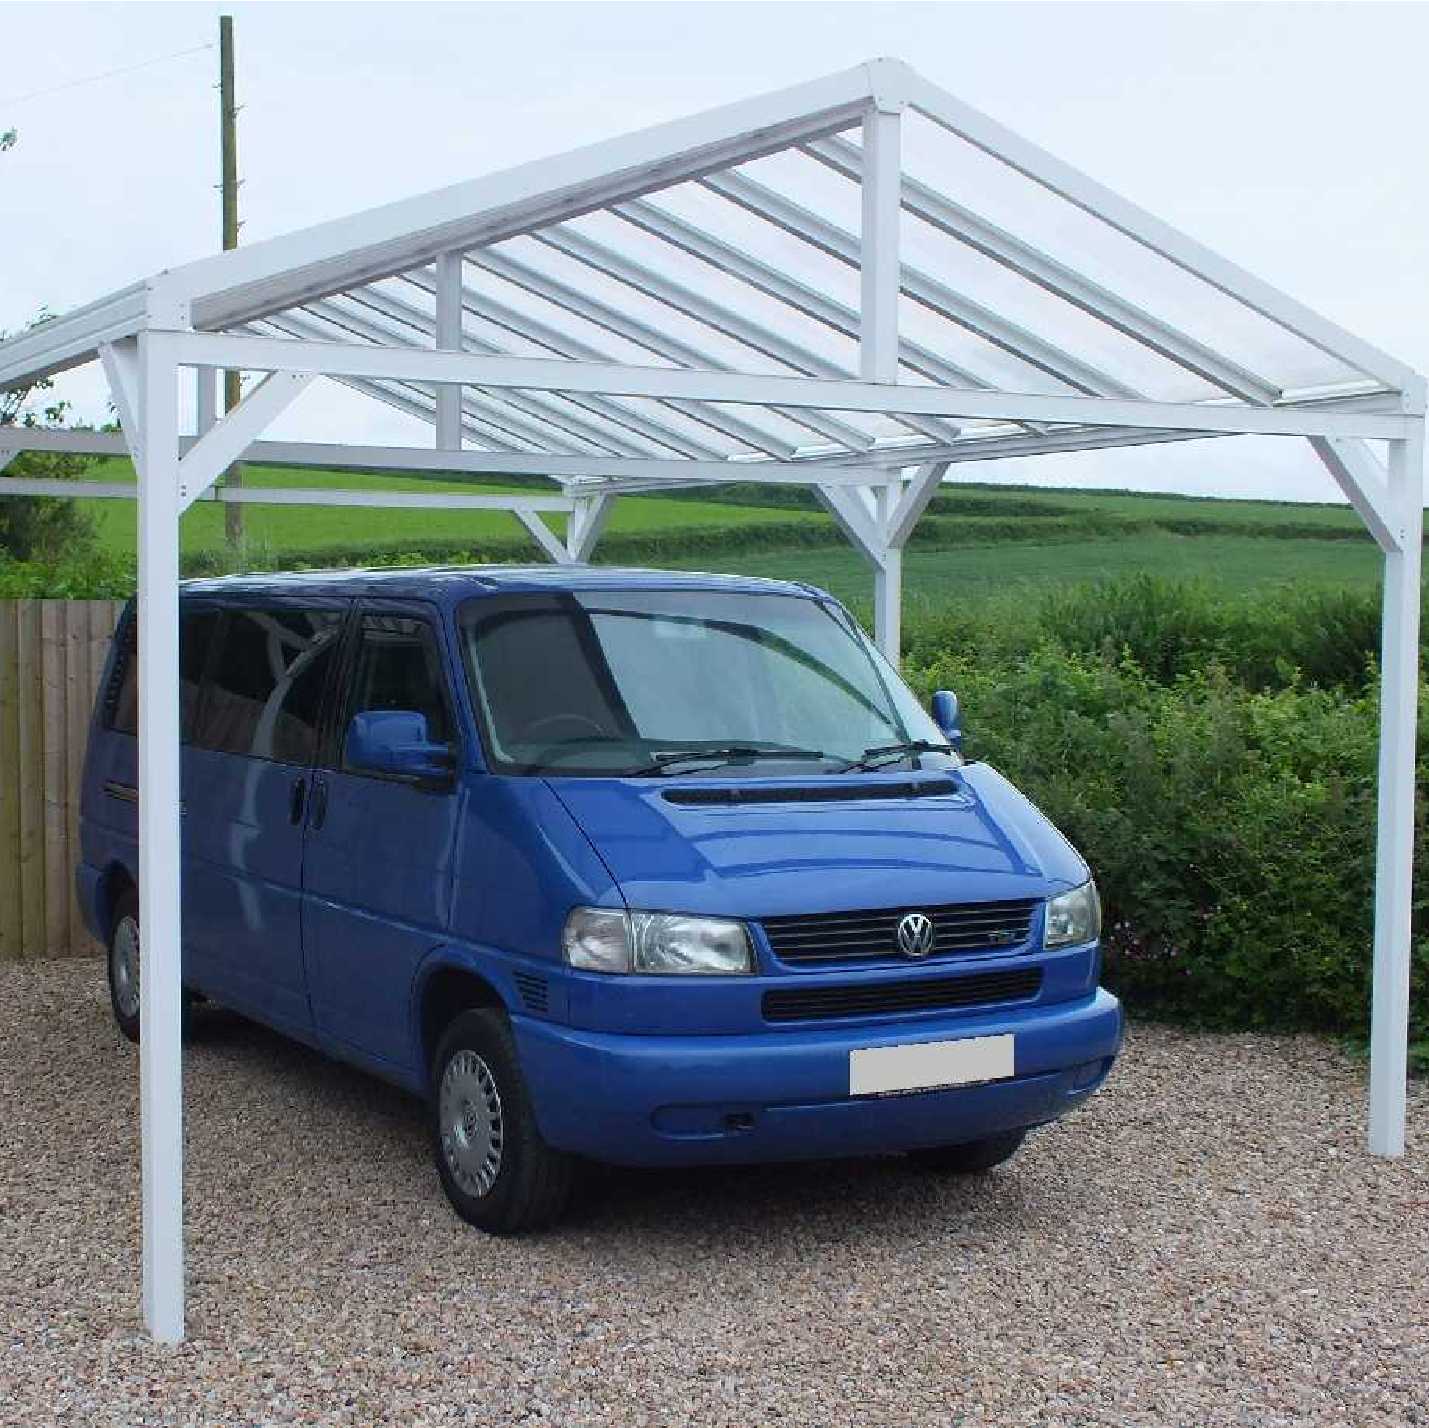 Omega Smart Free-Standing, White Gable-Roof (type 1) Canopy with 16mm Polycarbonate Glazing - 4.2m (W) x 4.0m (P), (6) Supporting Posts